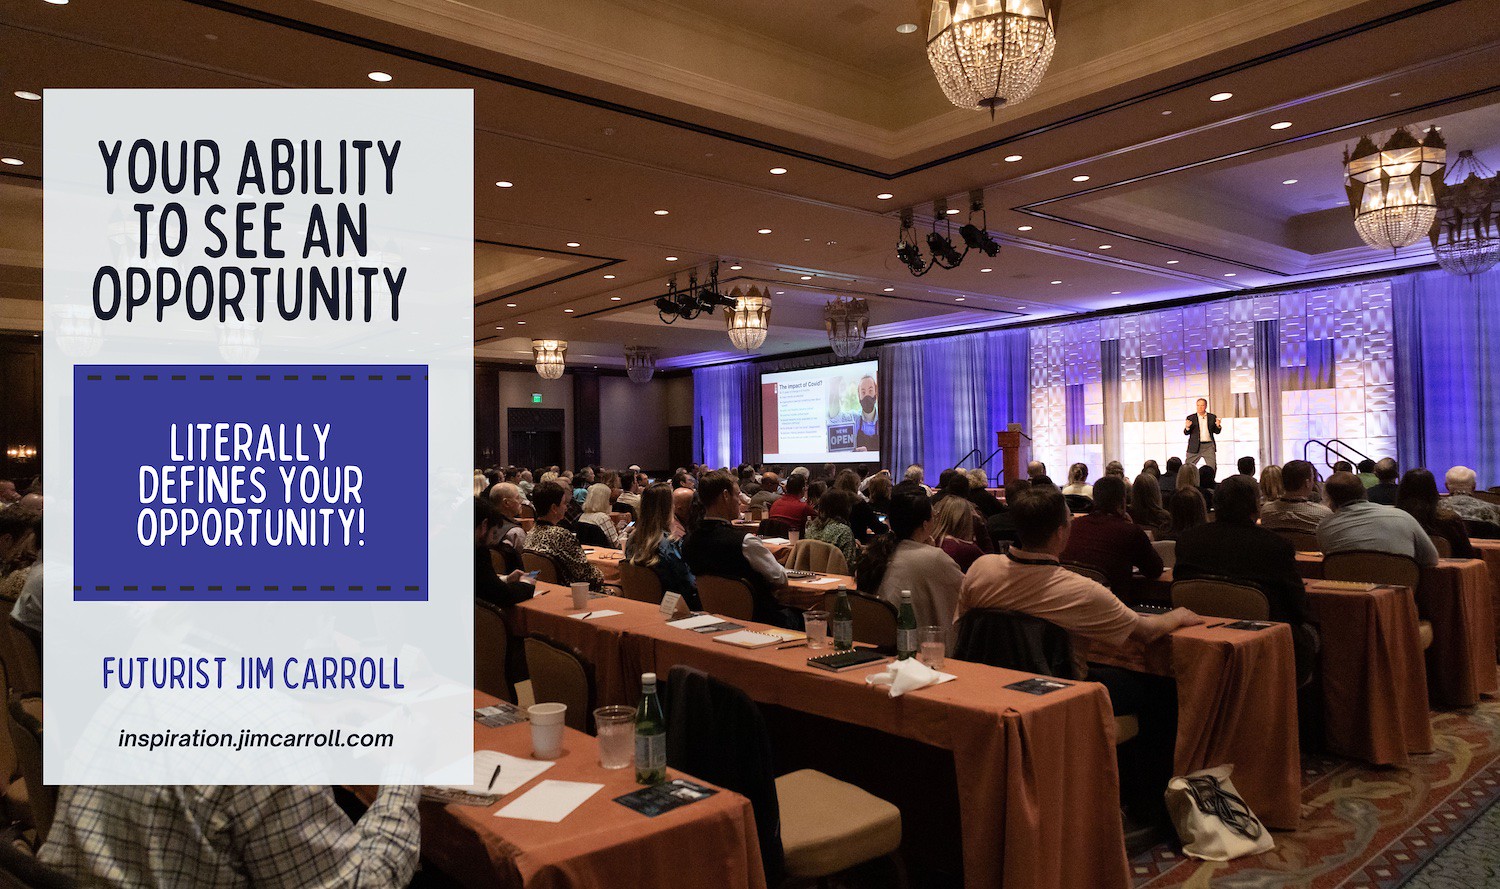 Daily Inspiration: "Your ability to see an opportunity literally defines your opportunity!" - Futurist Jim Carroll